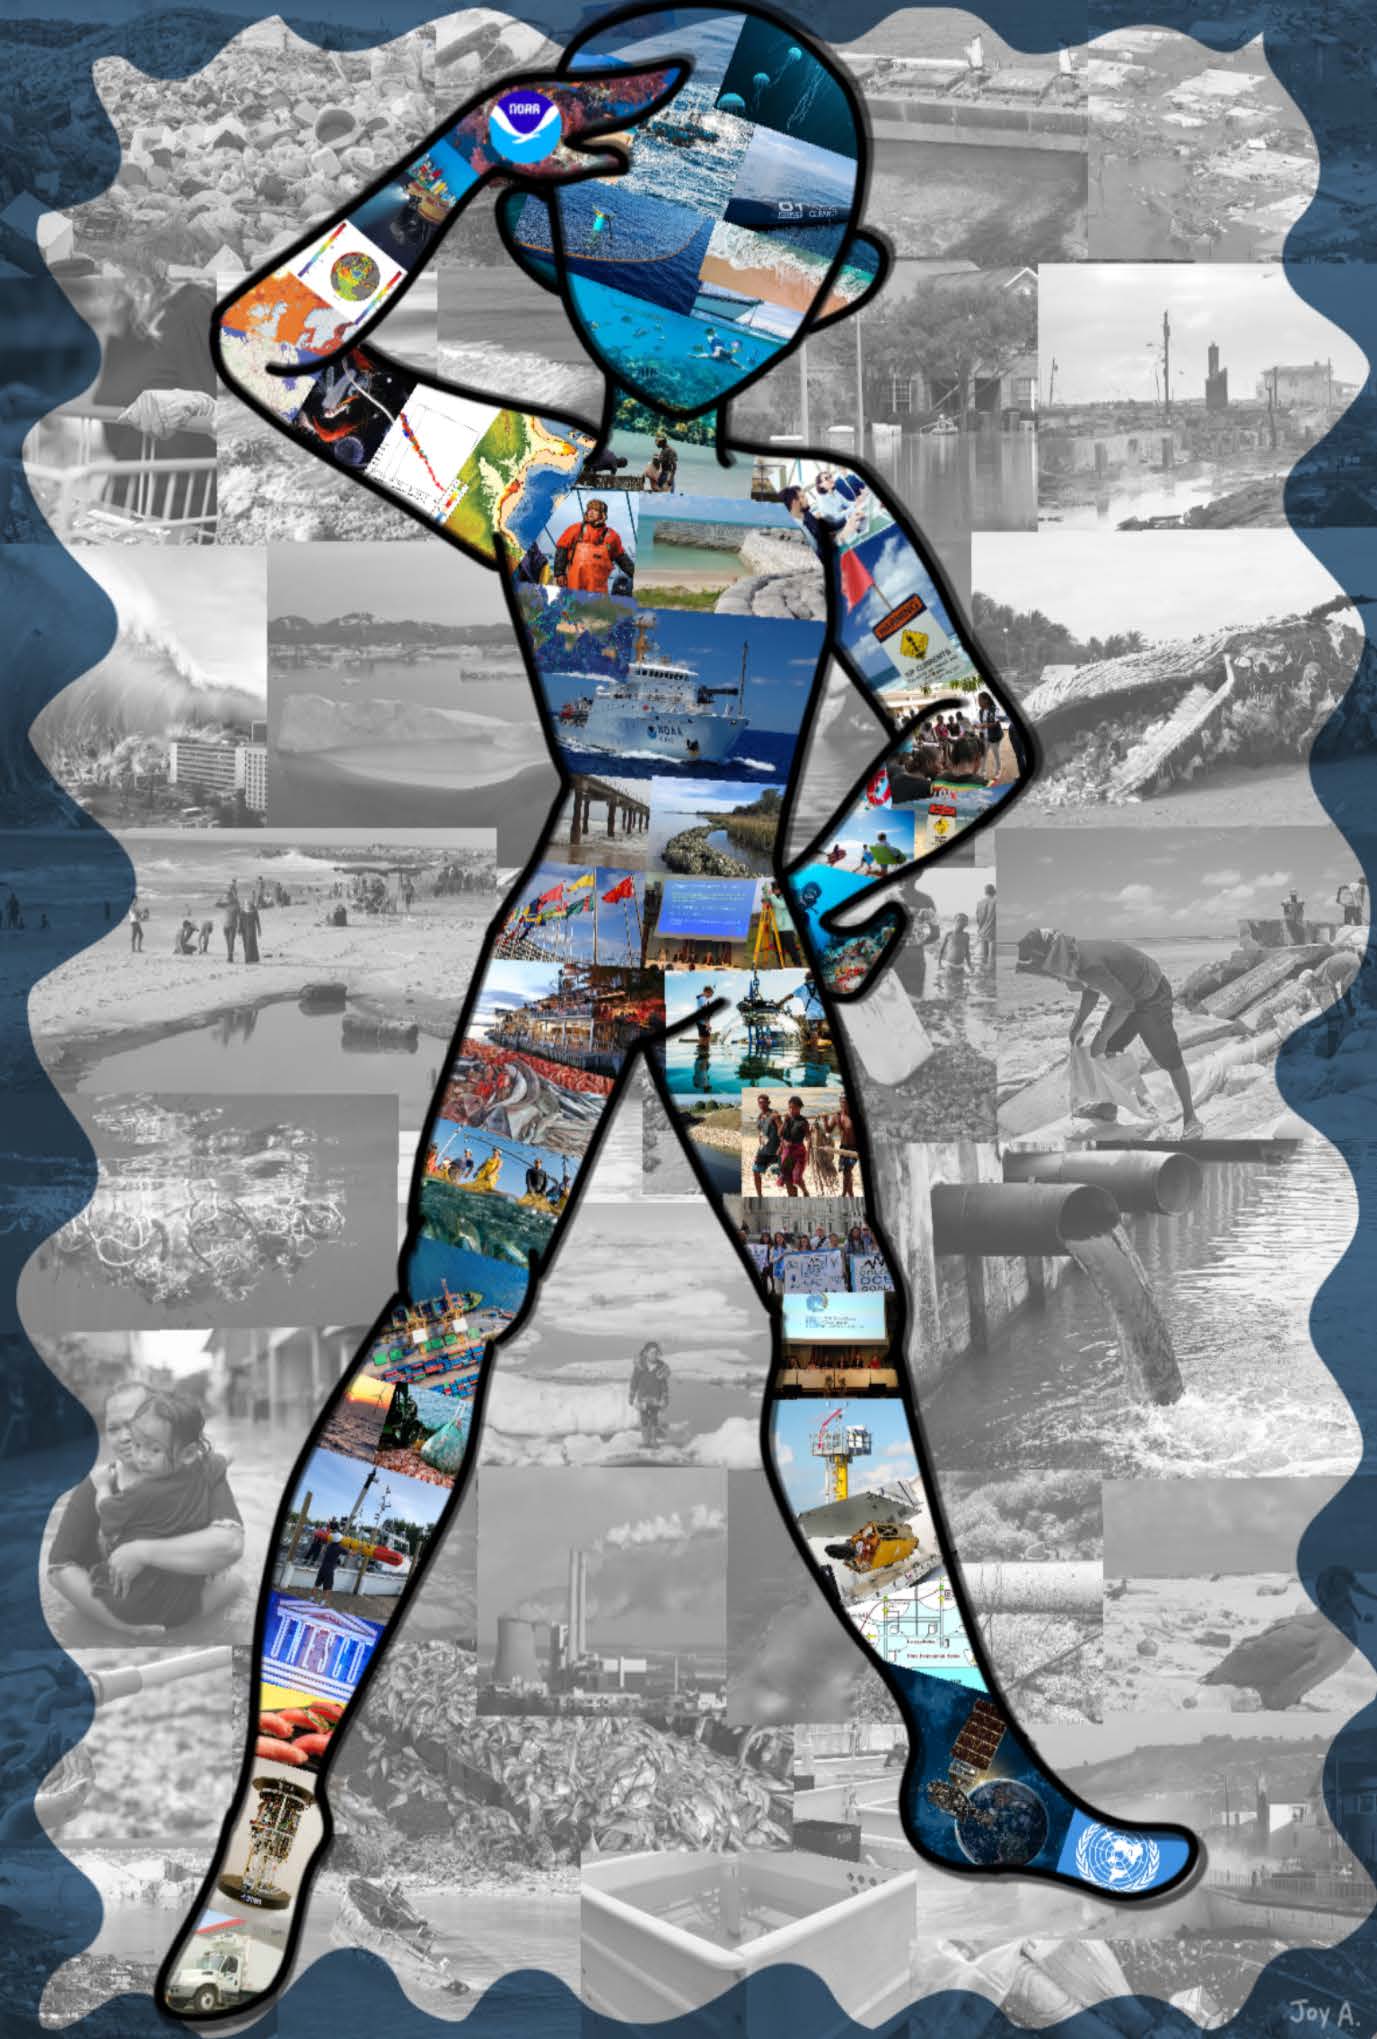 Illustration shows a cartoon silhouette of a person saluting and looking ready for action is filled with colorful photos of ocean data, technology, recreation, and science as well as the United Nations and NOAA logos. The background contains black-and-white photos of ocean activities, including ocean pollution and degradation.